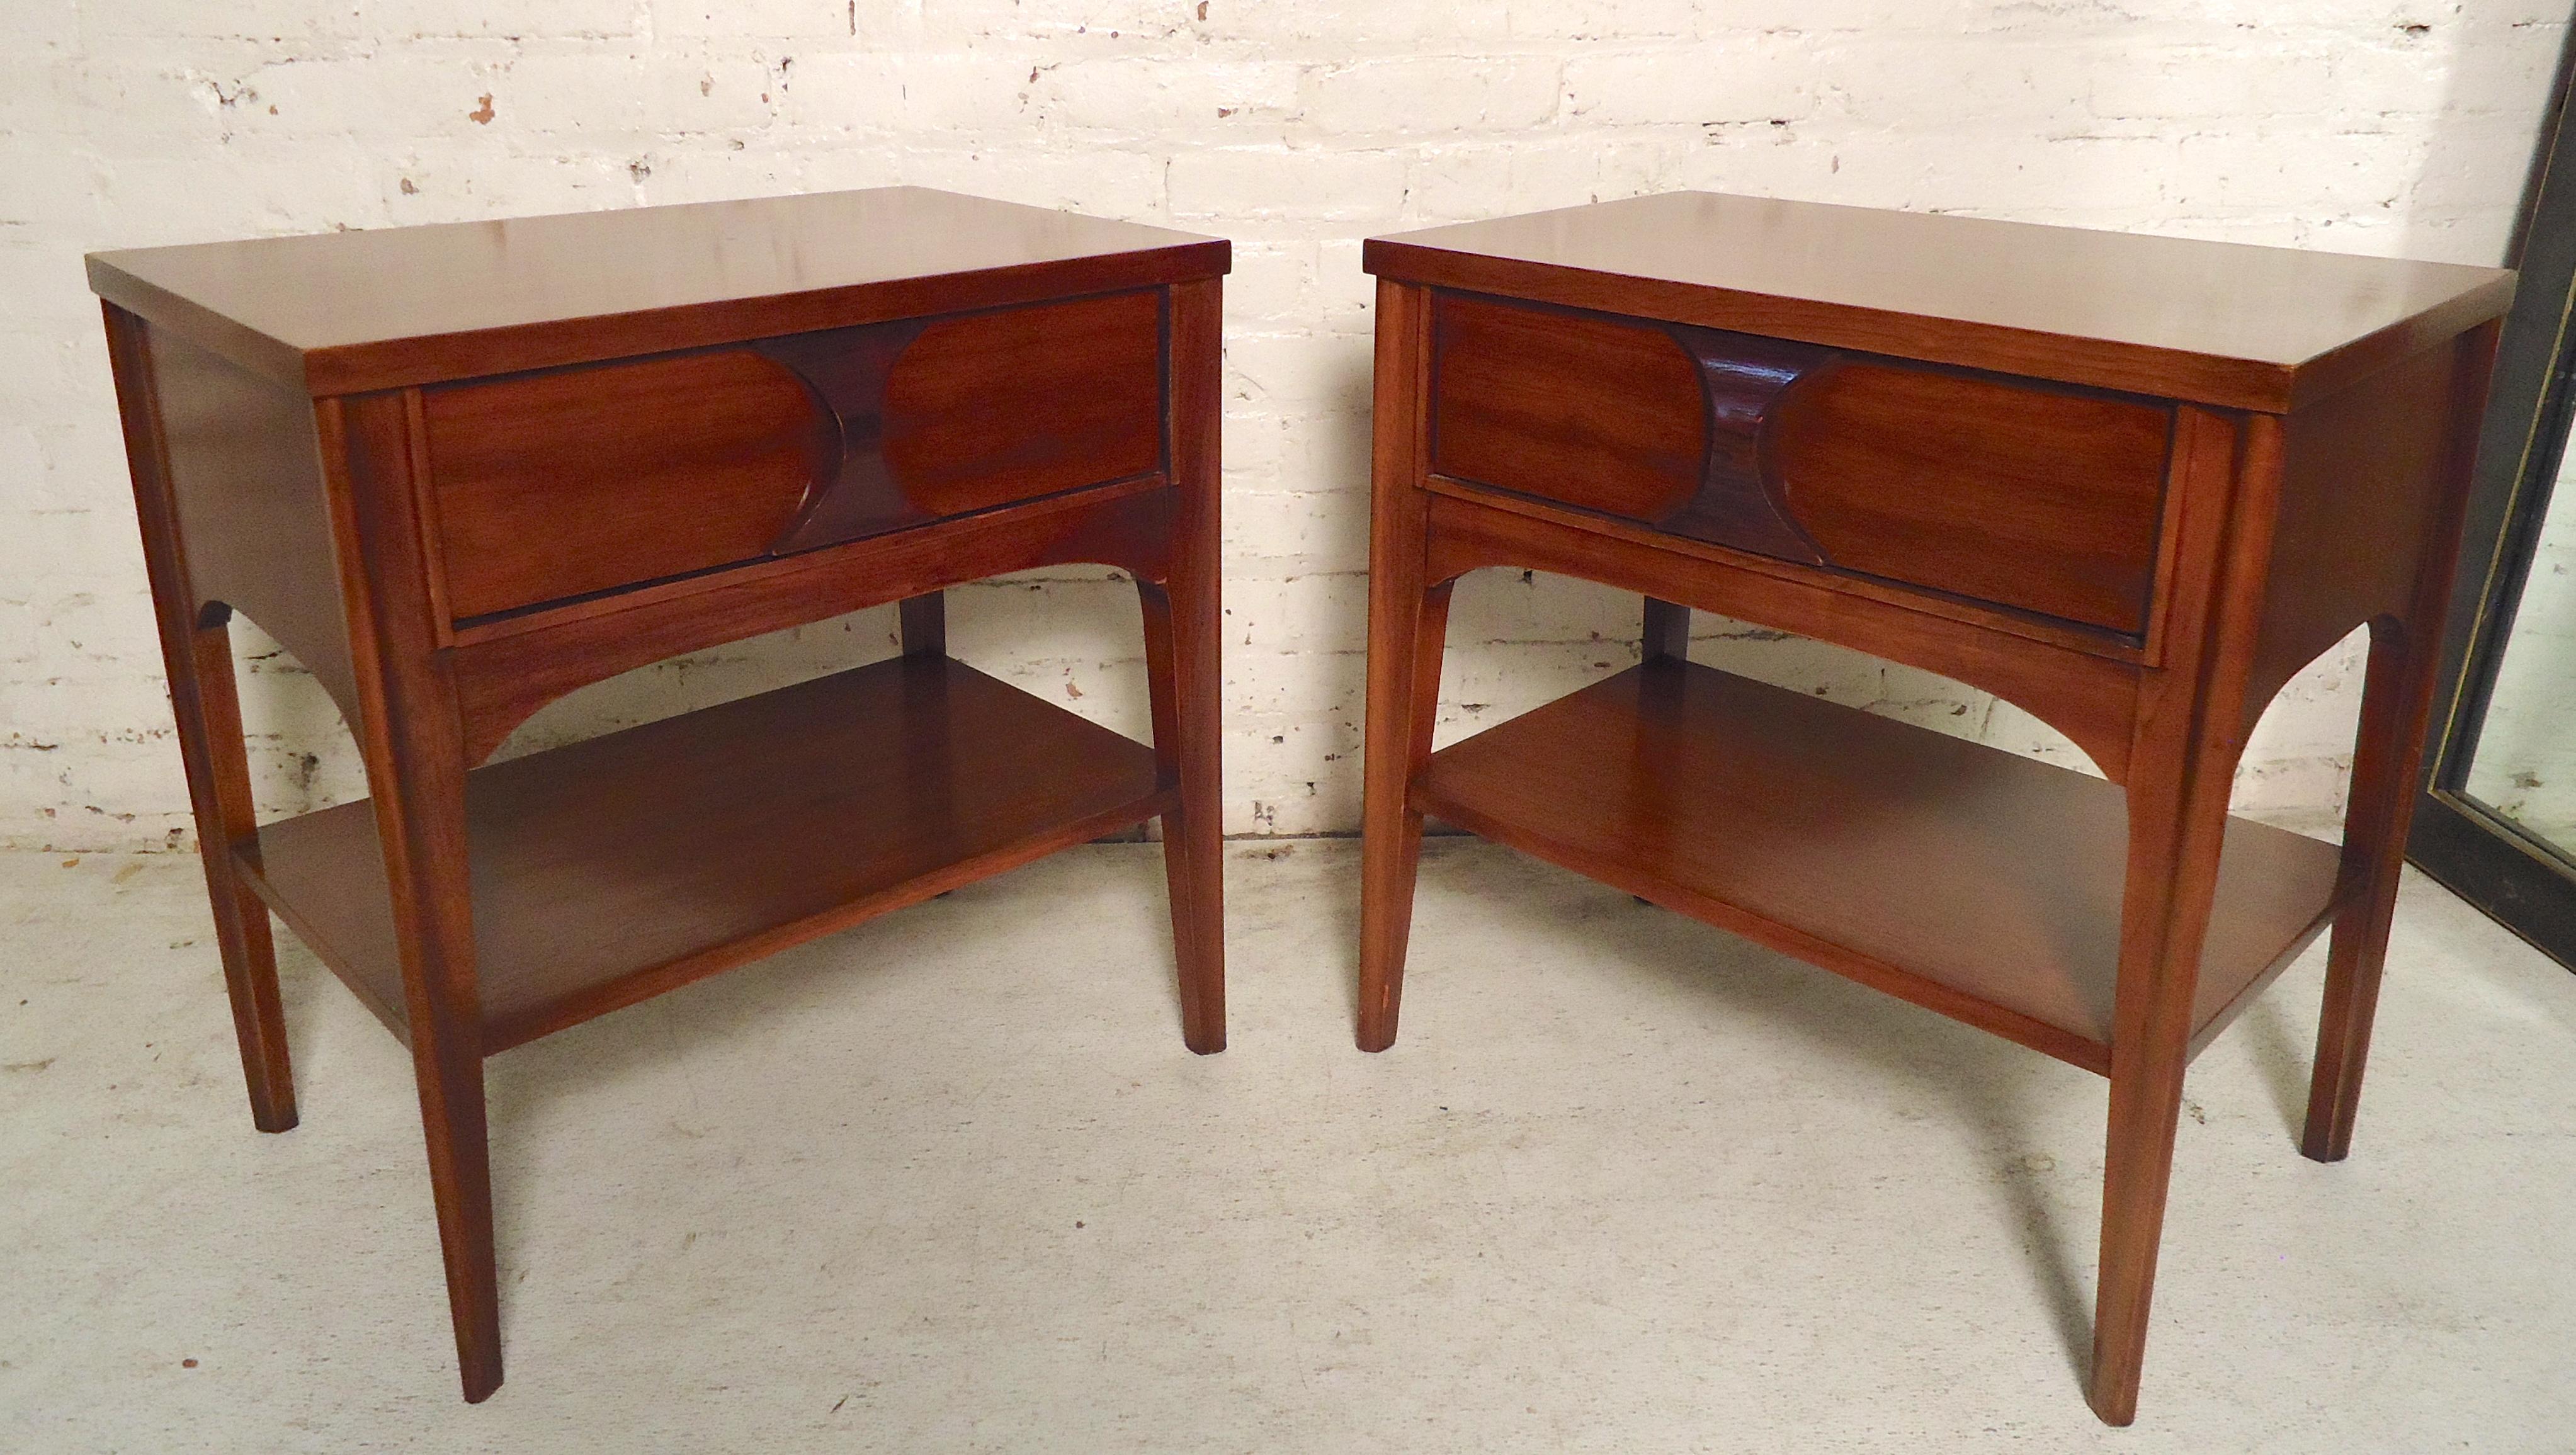 Pair of mid-century modern nightstands by Kent Coffey for their Perspecta line. Warm walnut grain, single drawer with sculpted wood handle and bottom shelf.
(Please confirm item location - NY or NJ - with dealer).
  